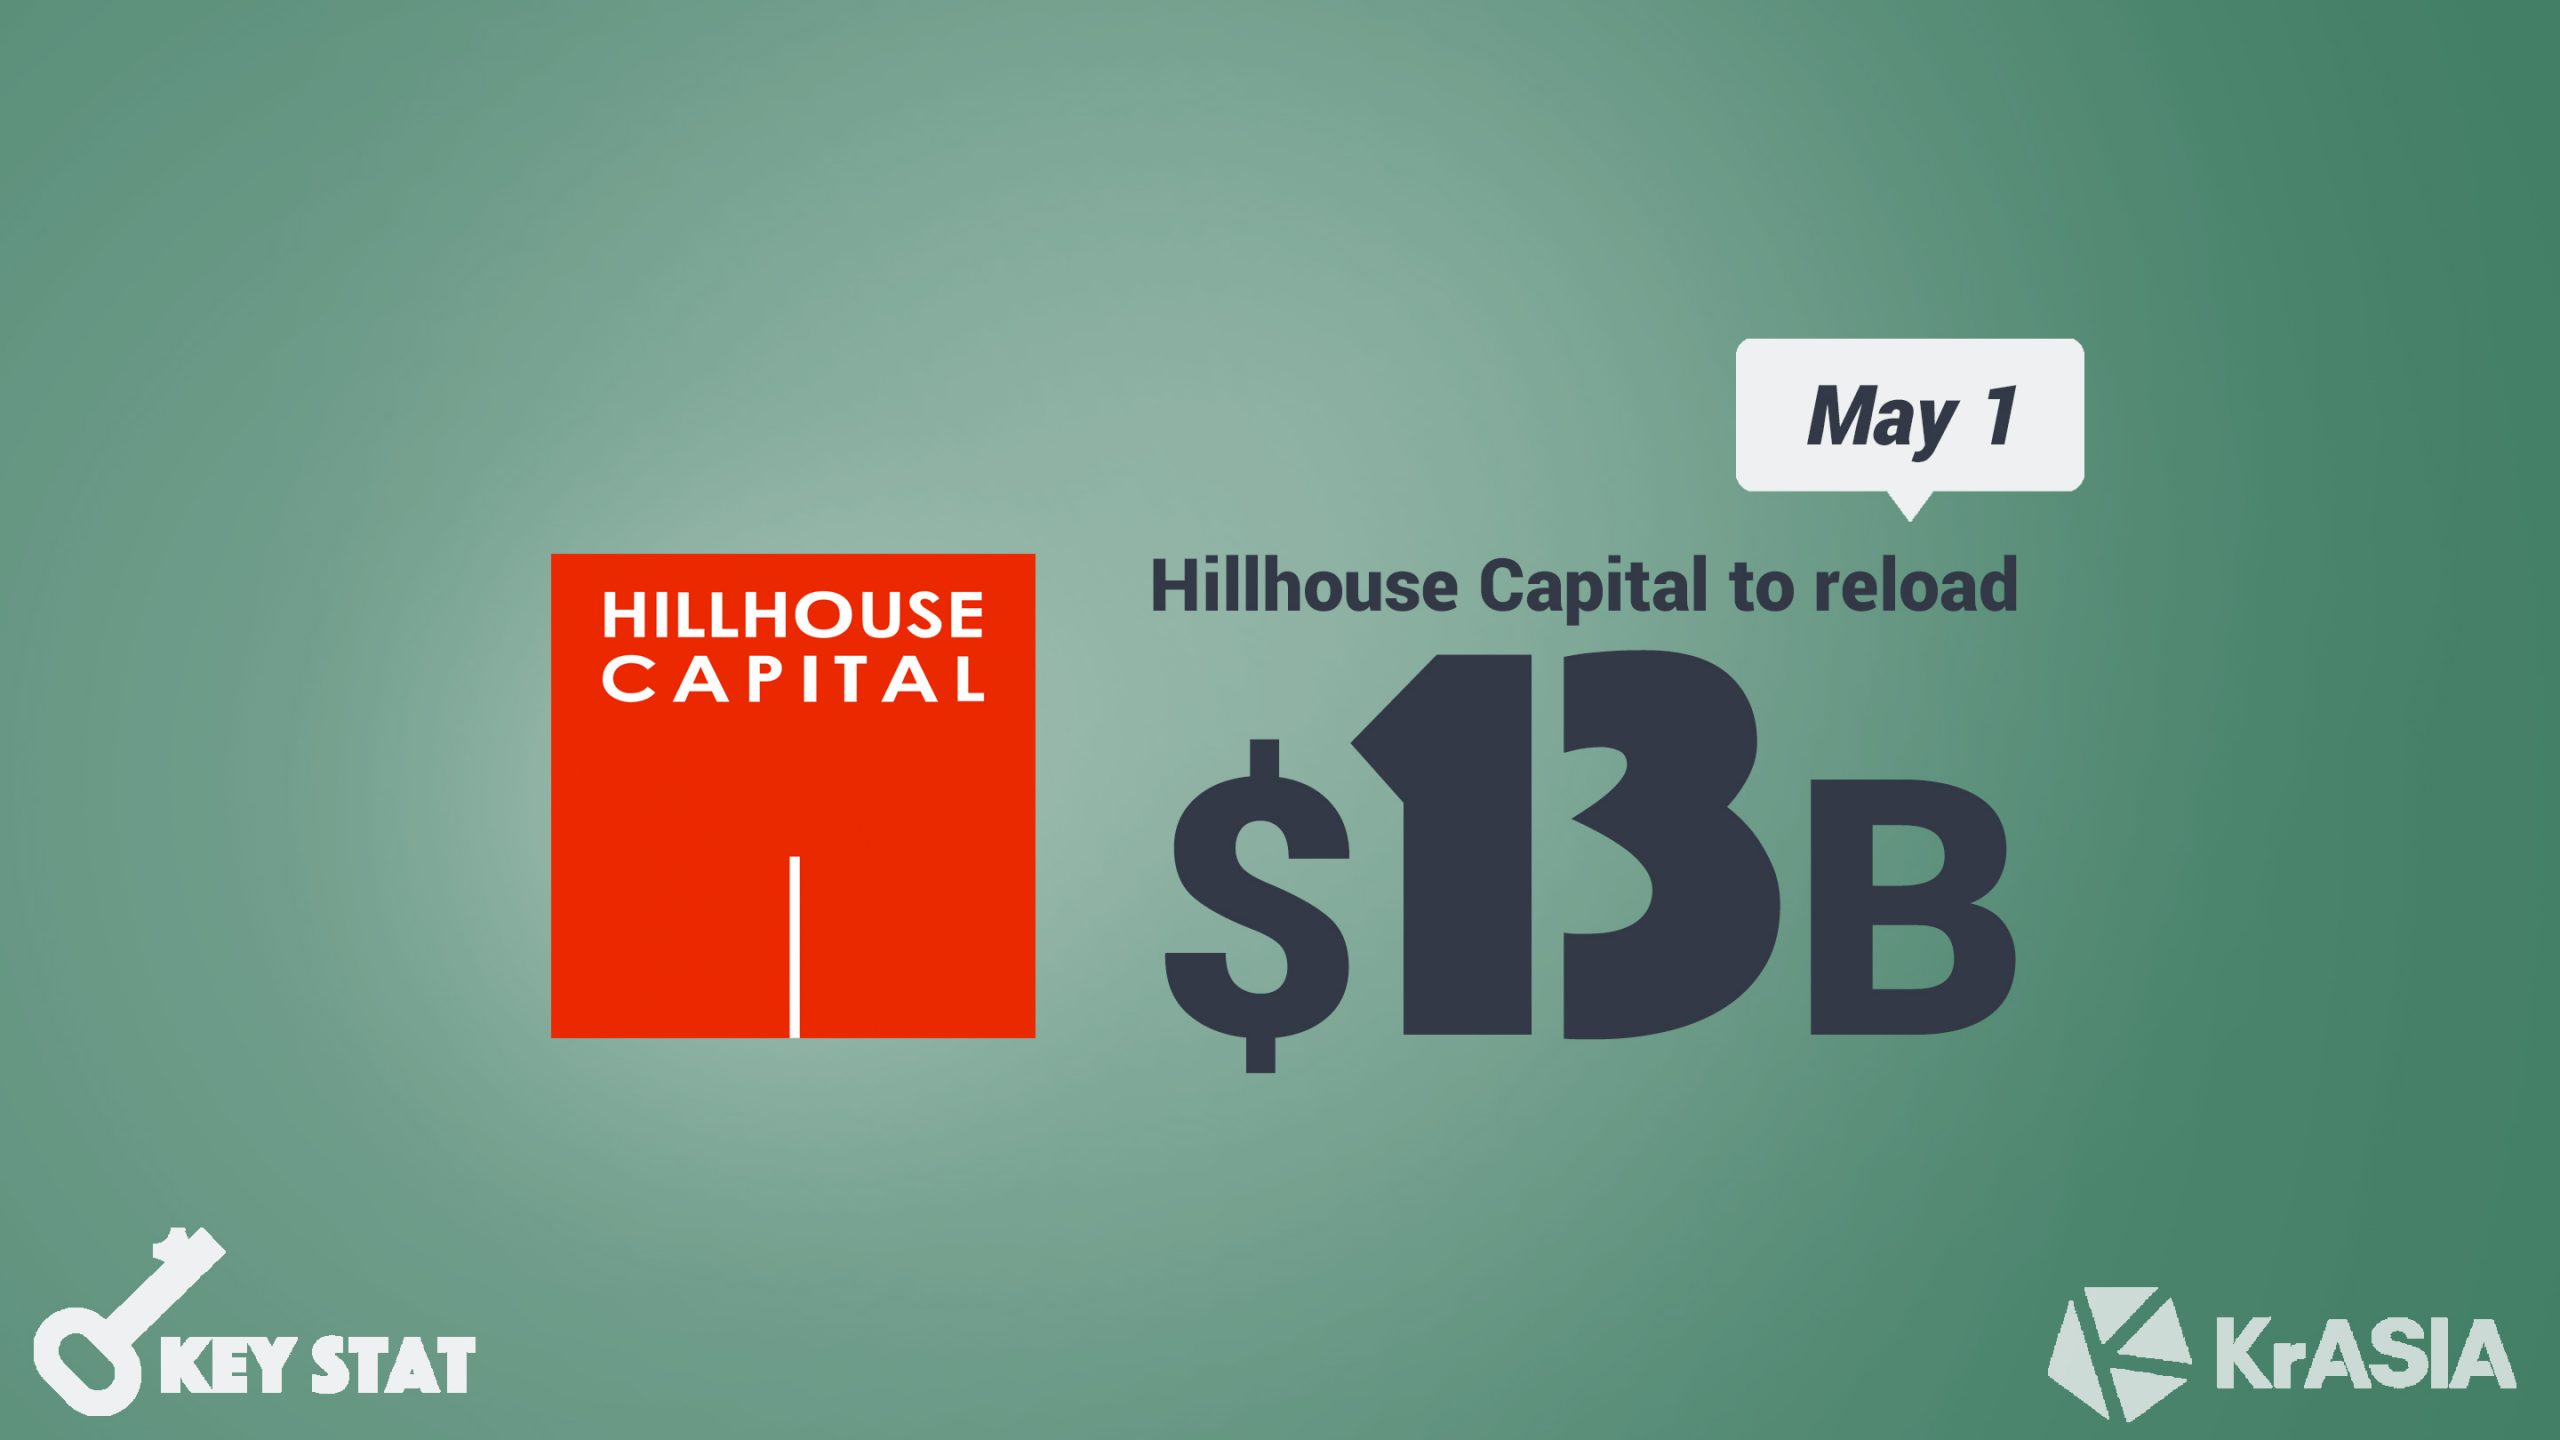 KEY STAT | Hillhouse Capital building one of Asia’s biggest PE pool with USD 13 billion raise